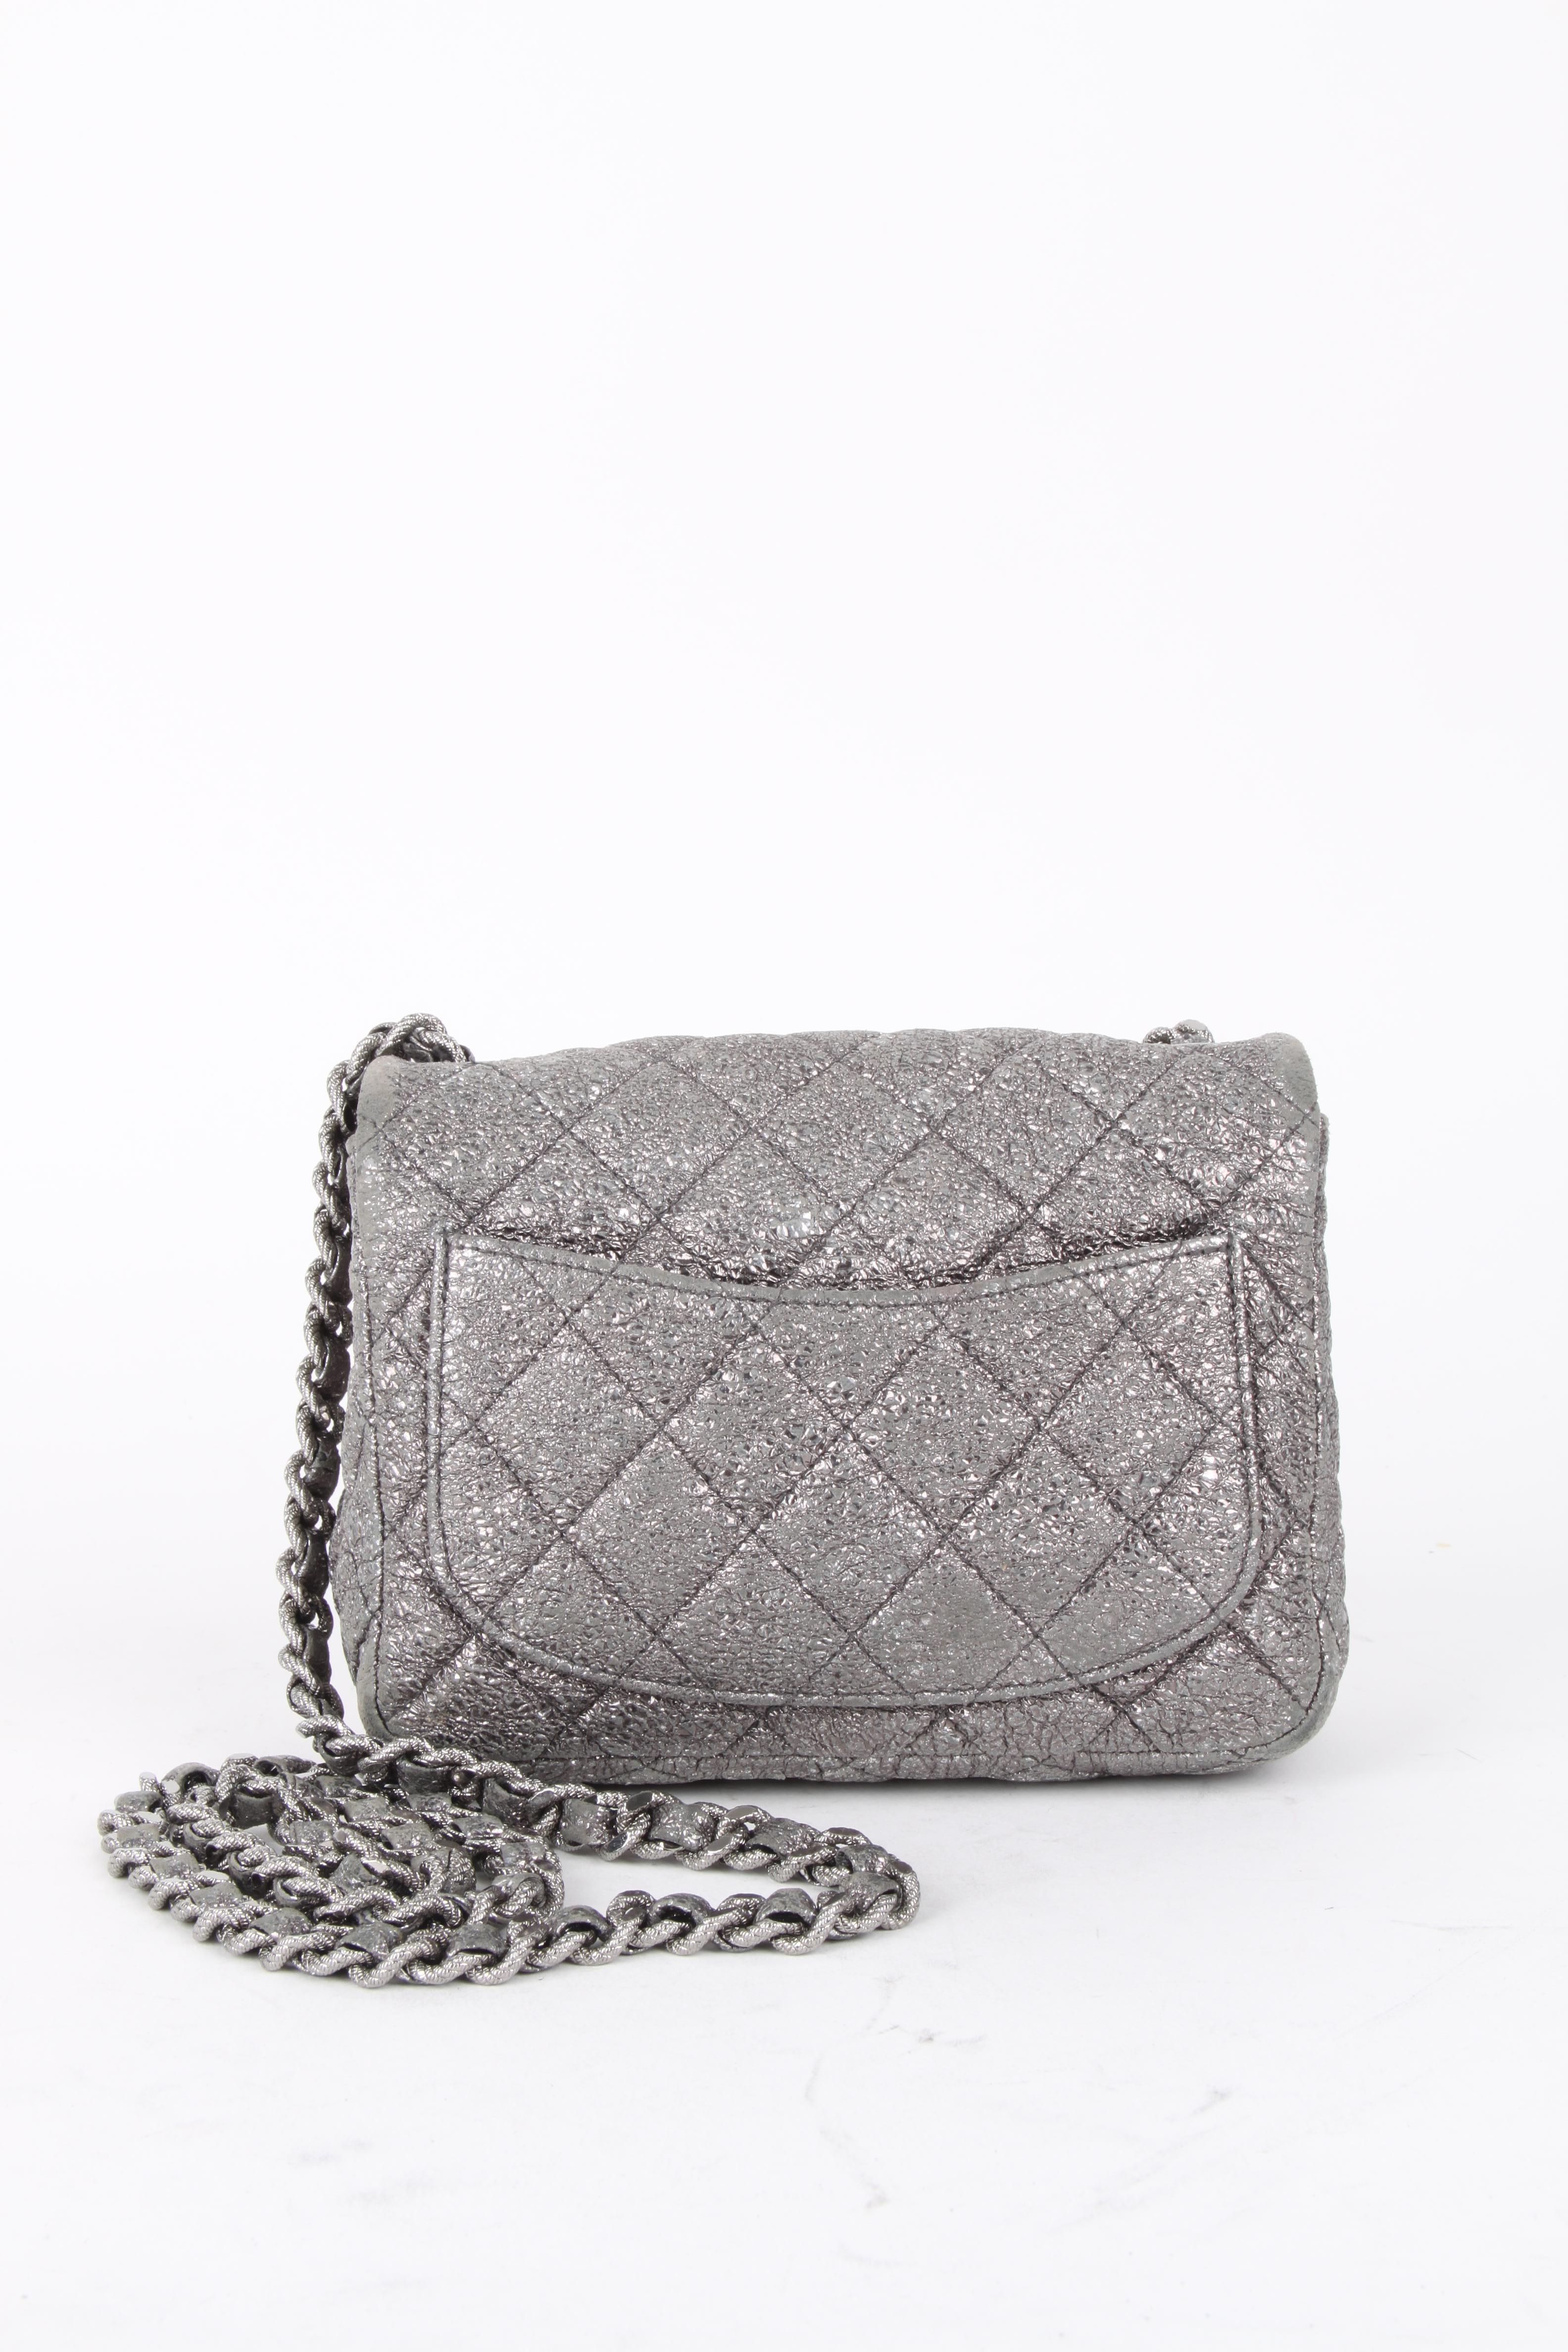 Chanel Silver Quilted Small Flap Crossbody Bag In Fair Condition For Sale In Baarn, NL